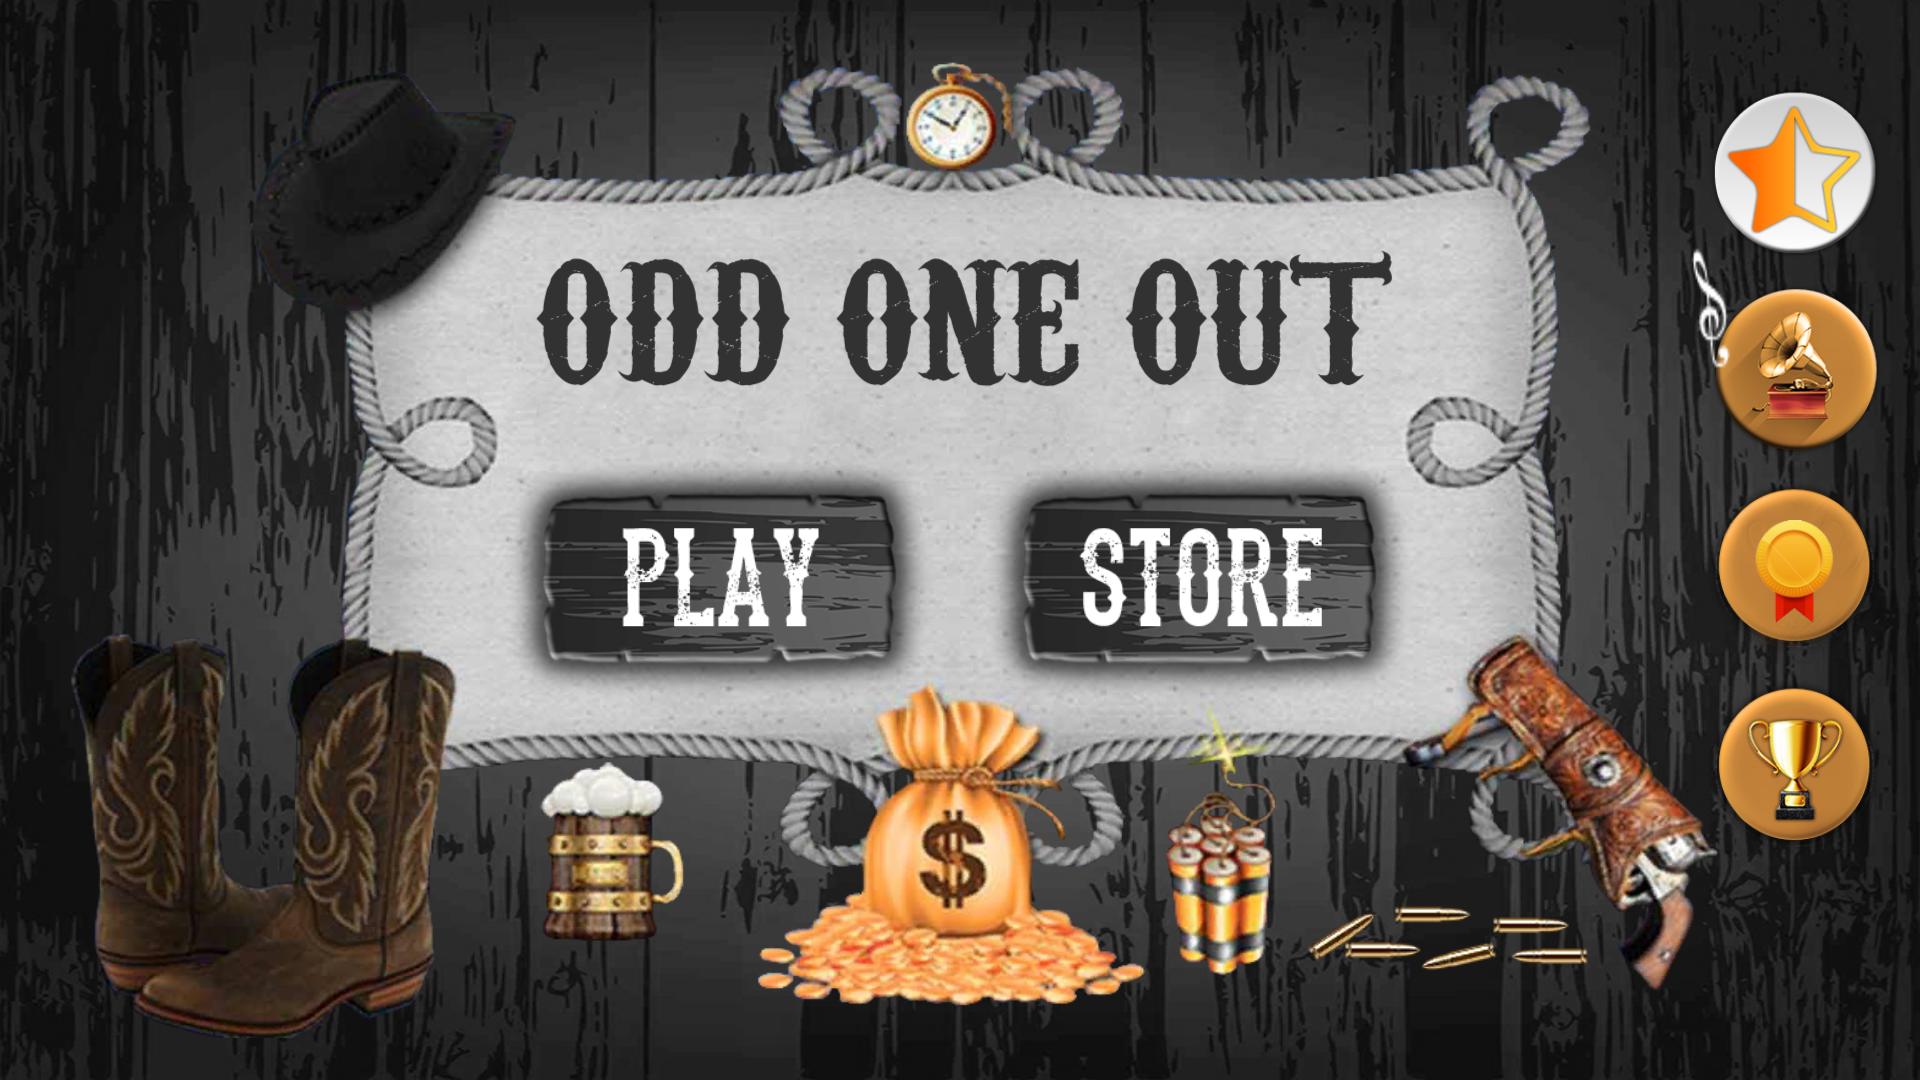 Odd one out магазин. Odds on игра. Odd one out game. Стейк аут игра. Say out game